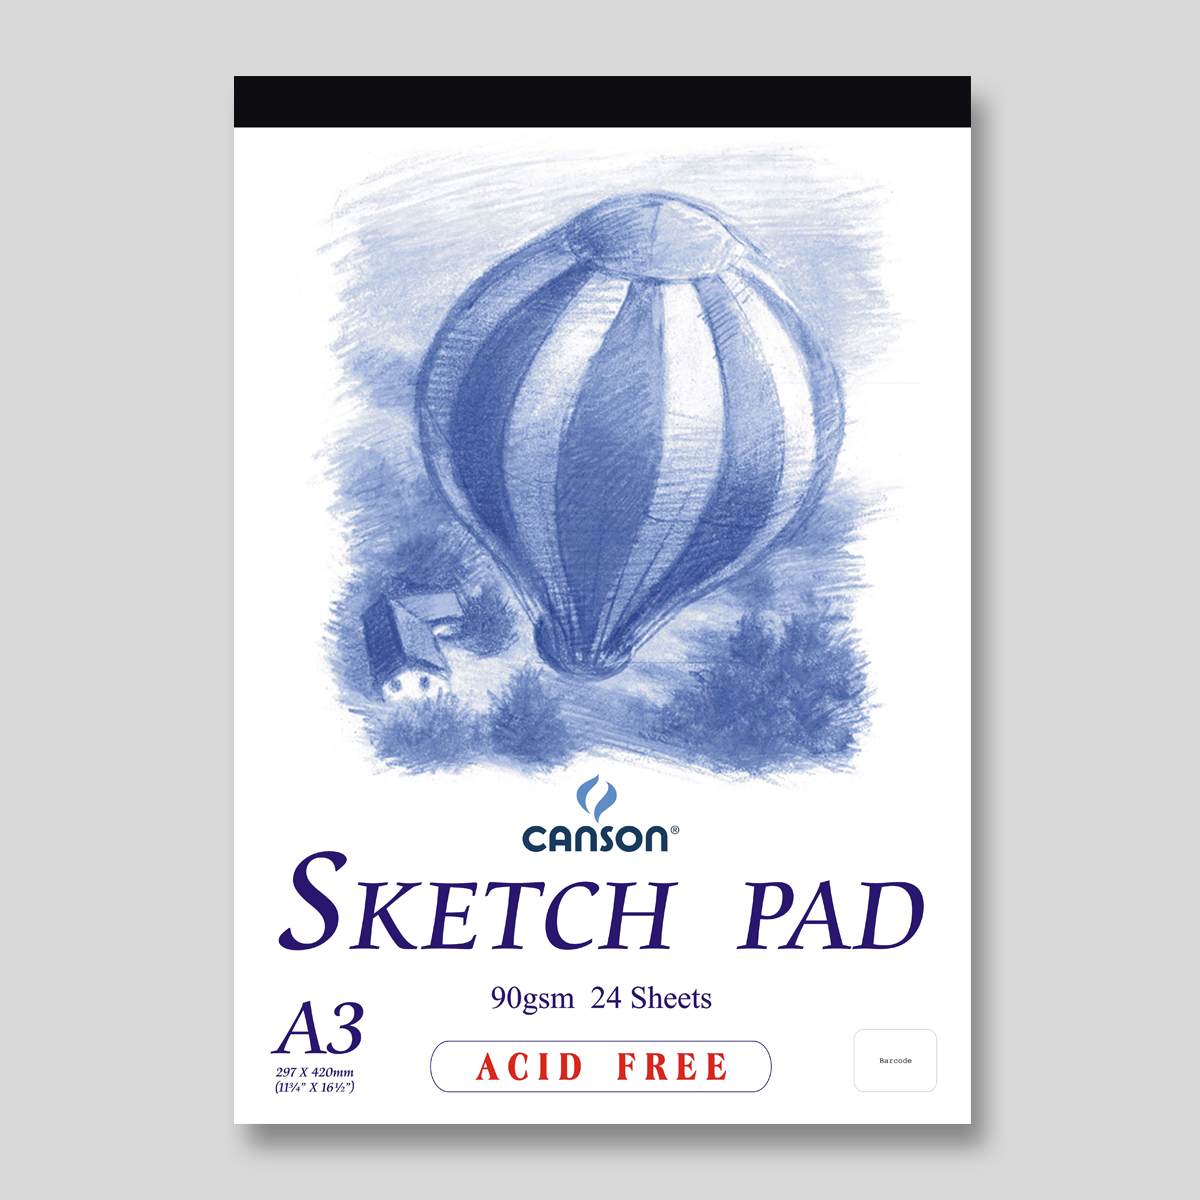 https://ifex.com.ph/wp-content/uploads/2021/01/isu-1200-x-1200-canson-balloon-sketchpad-A3-1.png